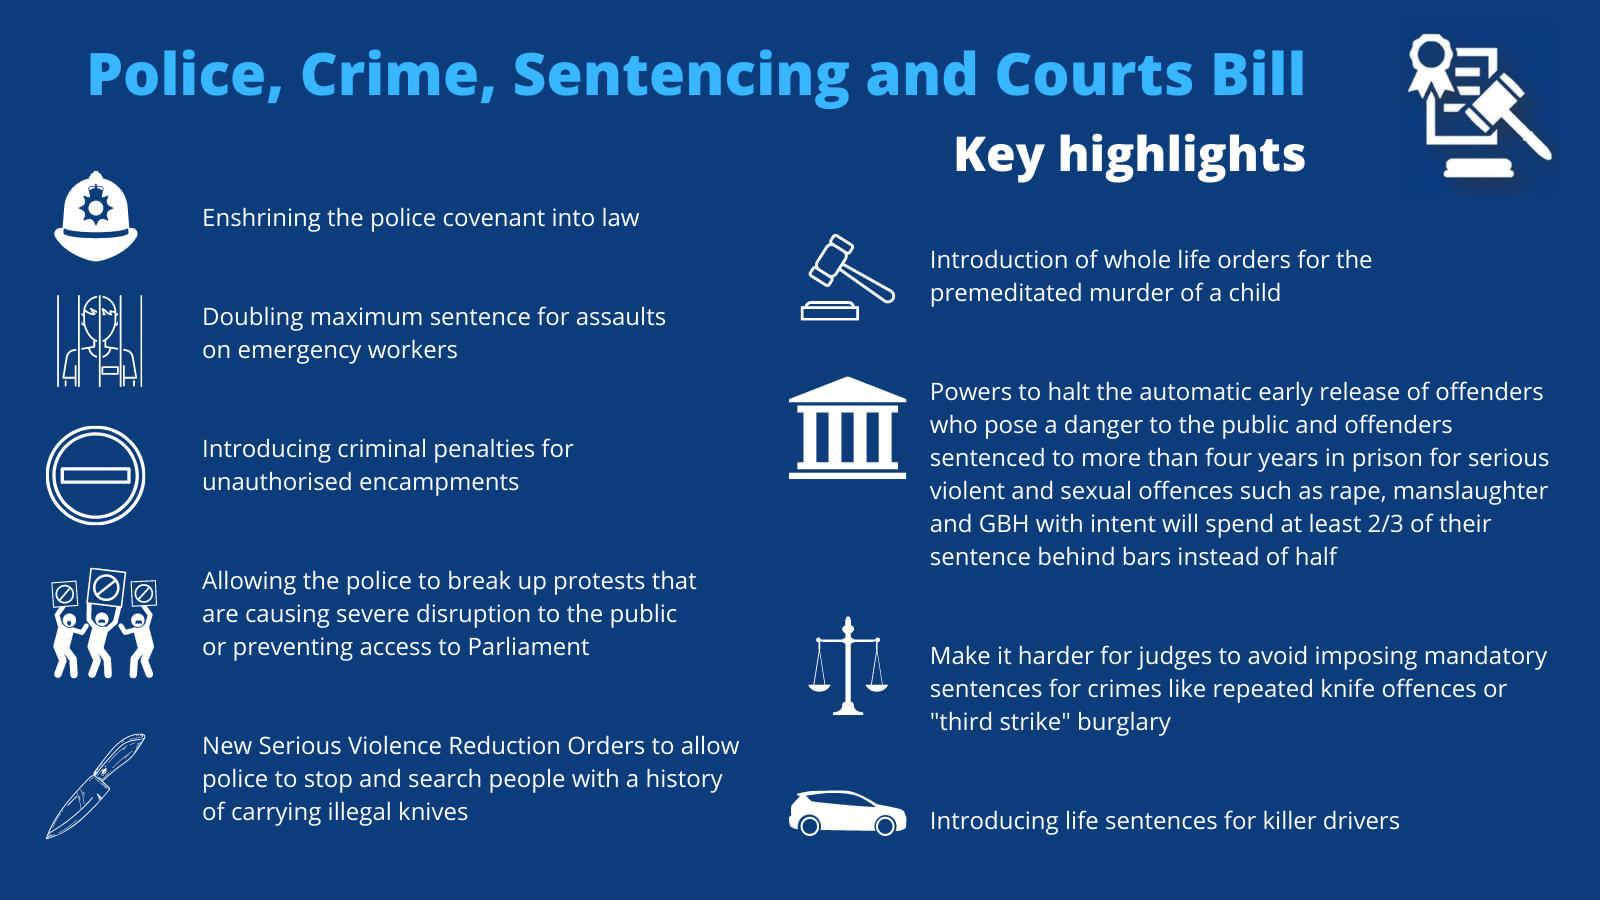 Police, Crime, Sentencing and Courts Bill - Key Highlights